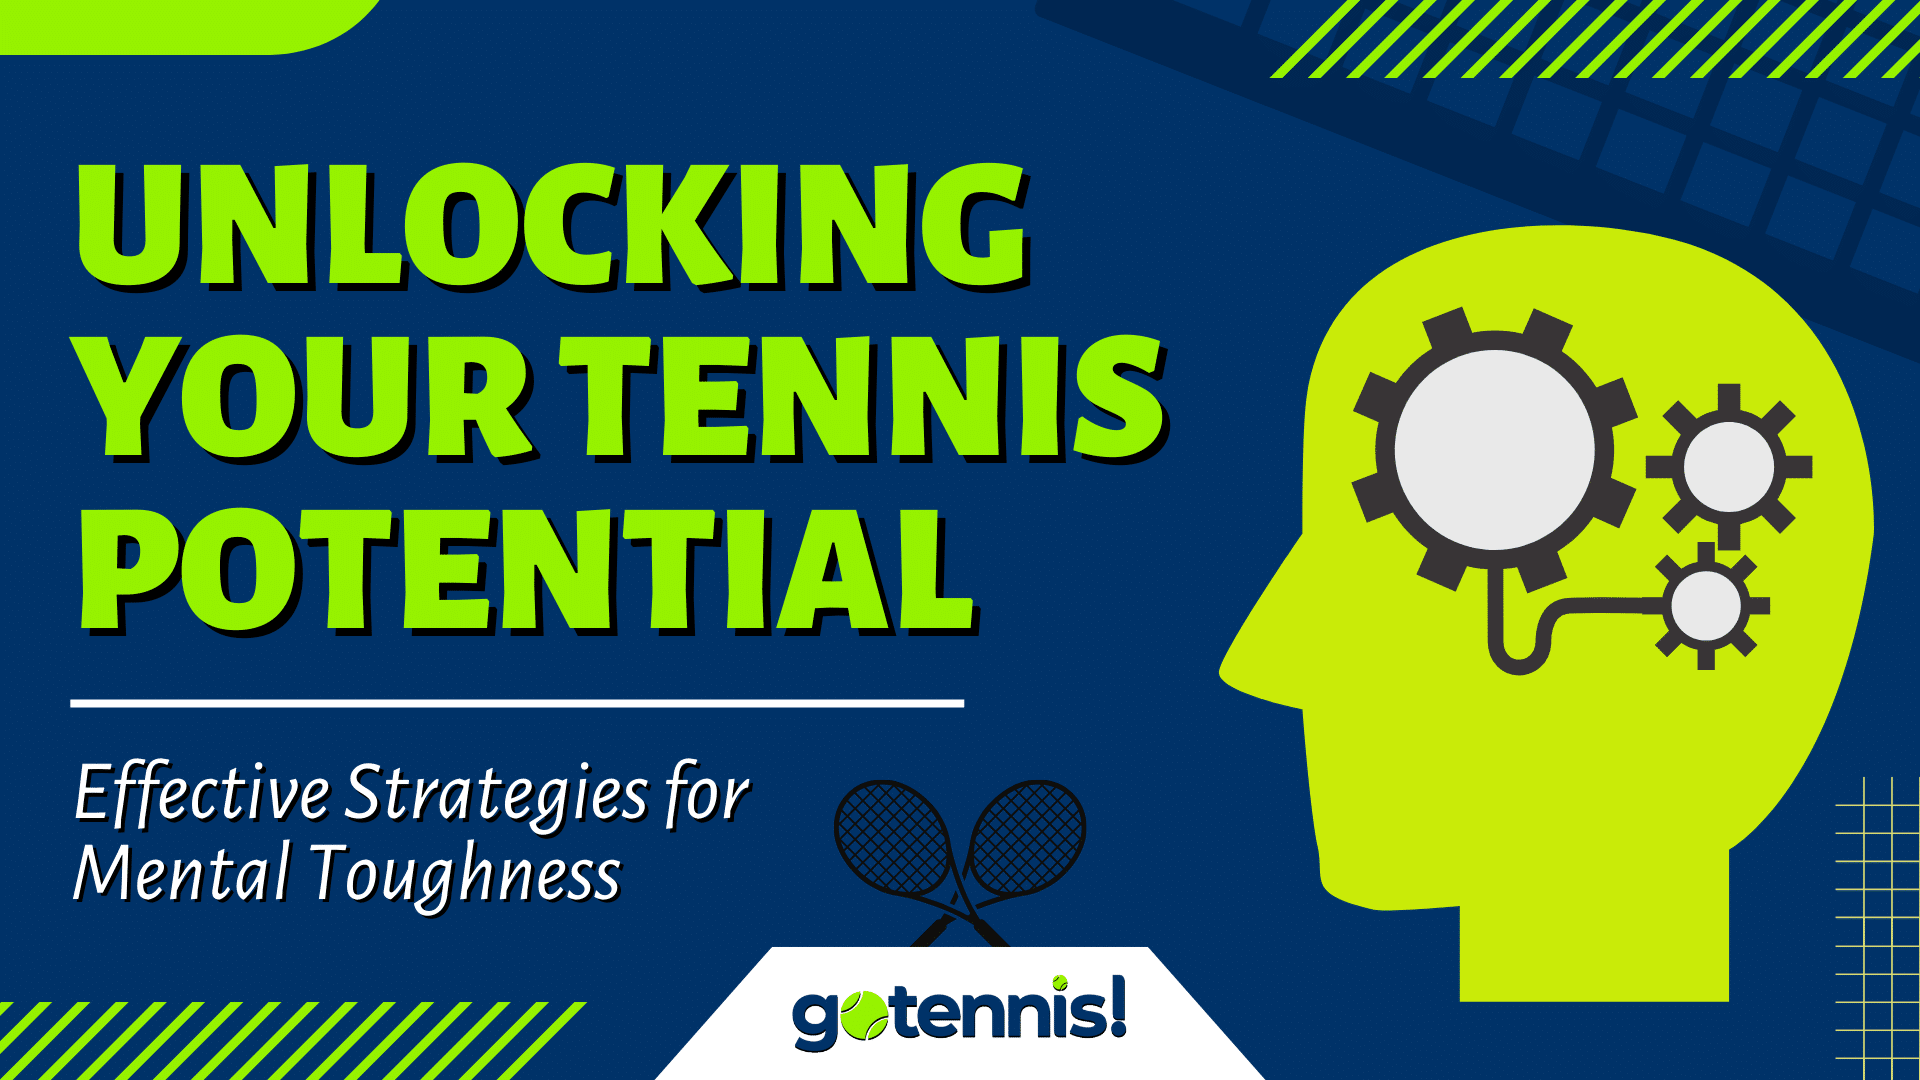 Unlocking Your Tennis Potential: Effective Strategies for Mental Toughness